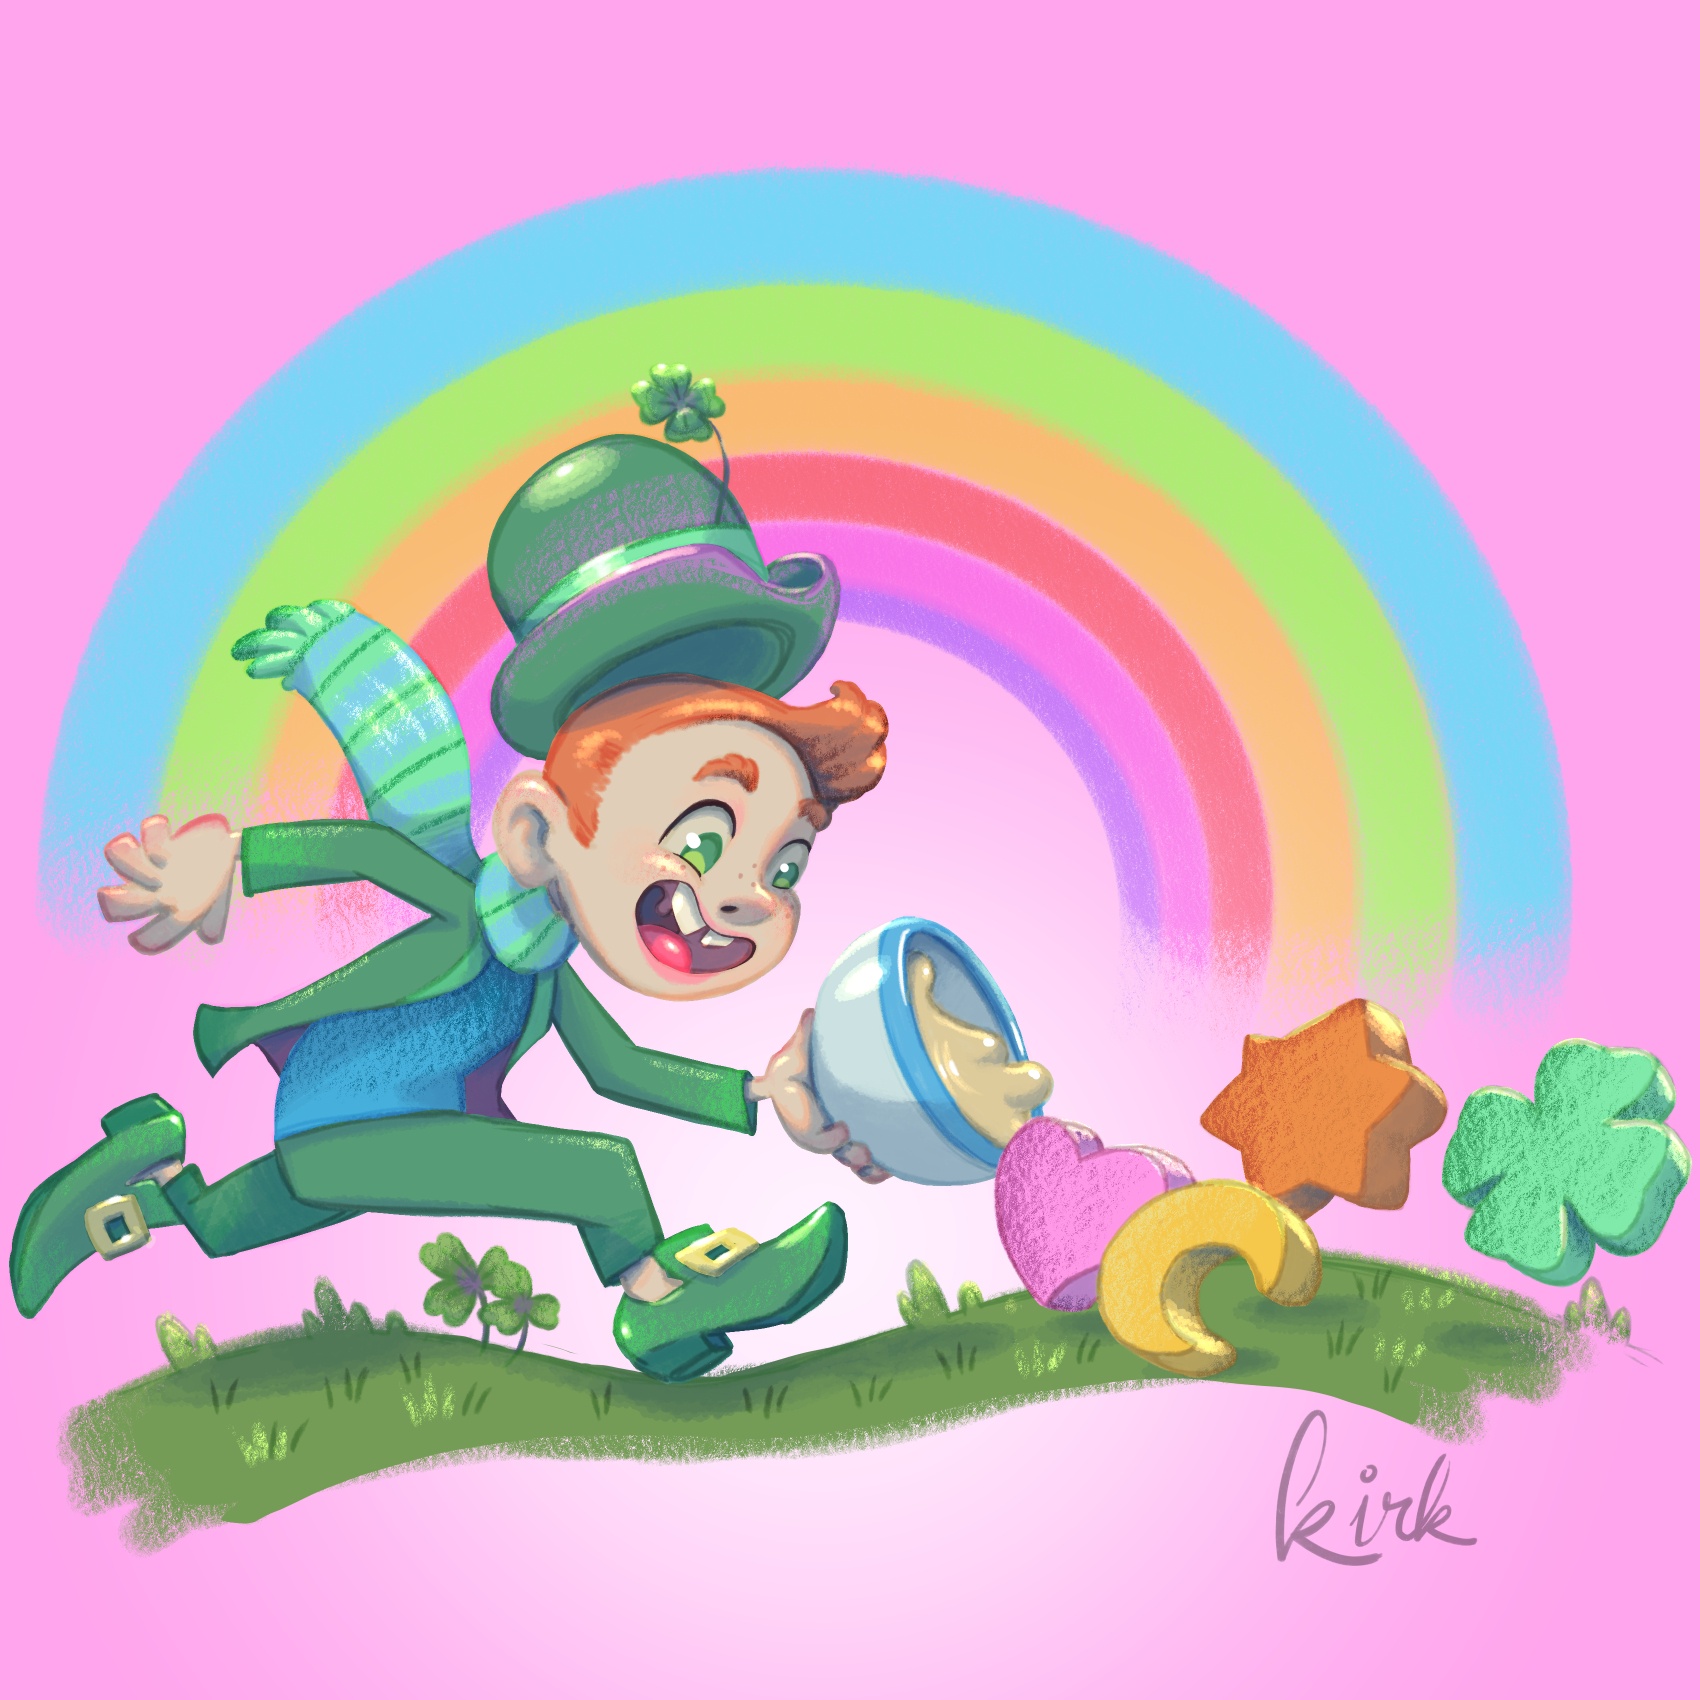 Professional Illustration for Children's Books, Games, and Education - Magically Delicious